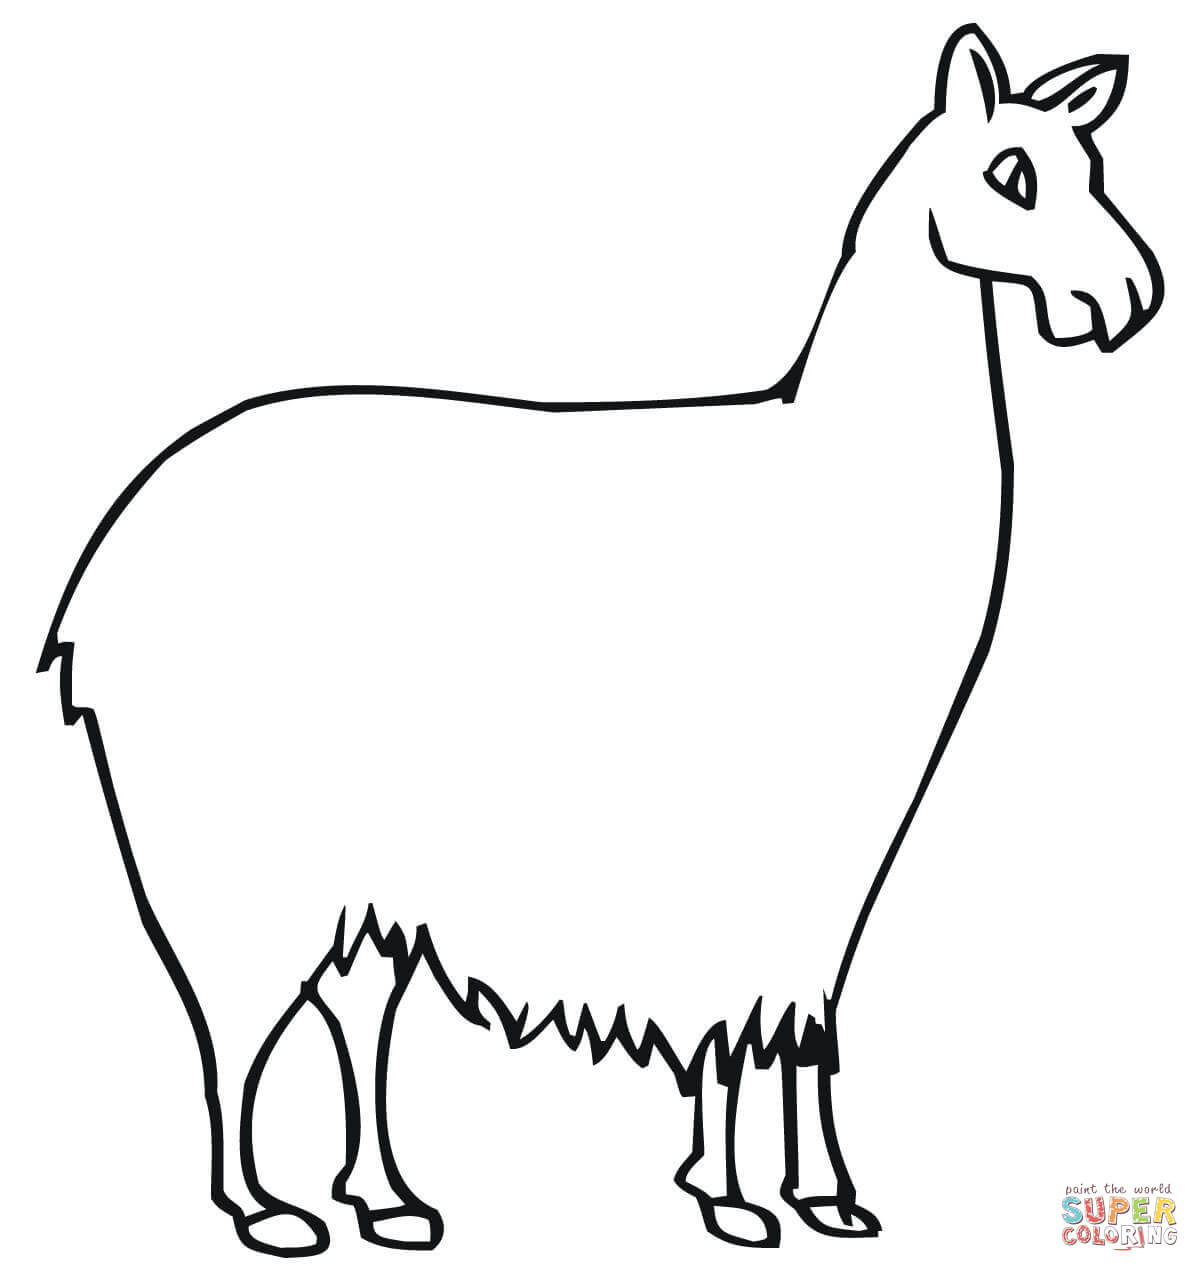 Llama South American Camelid coloring page | Free Printable ...